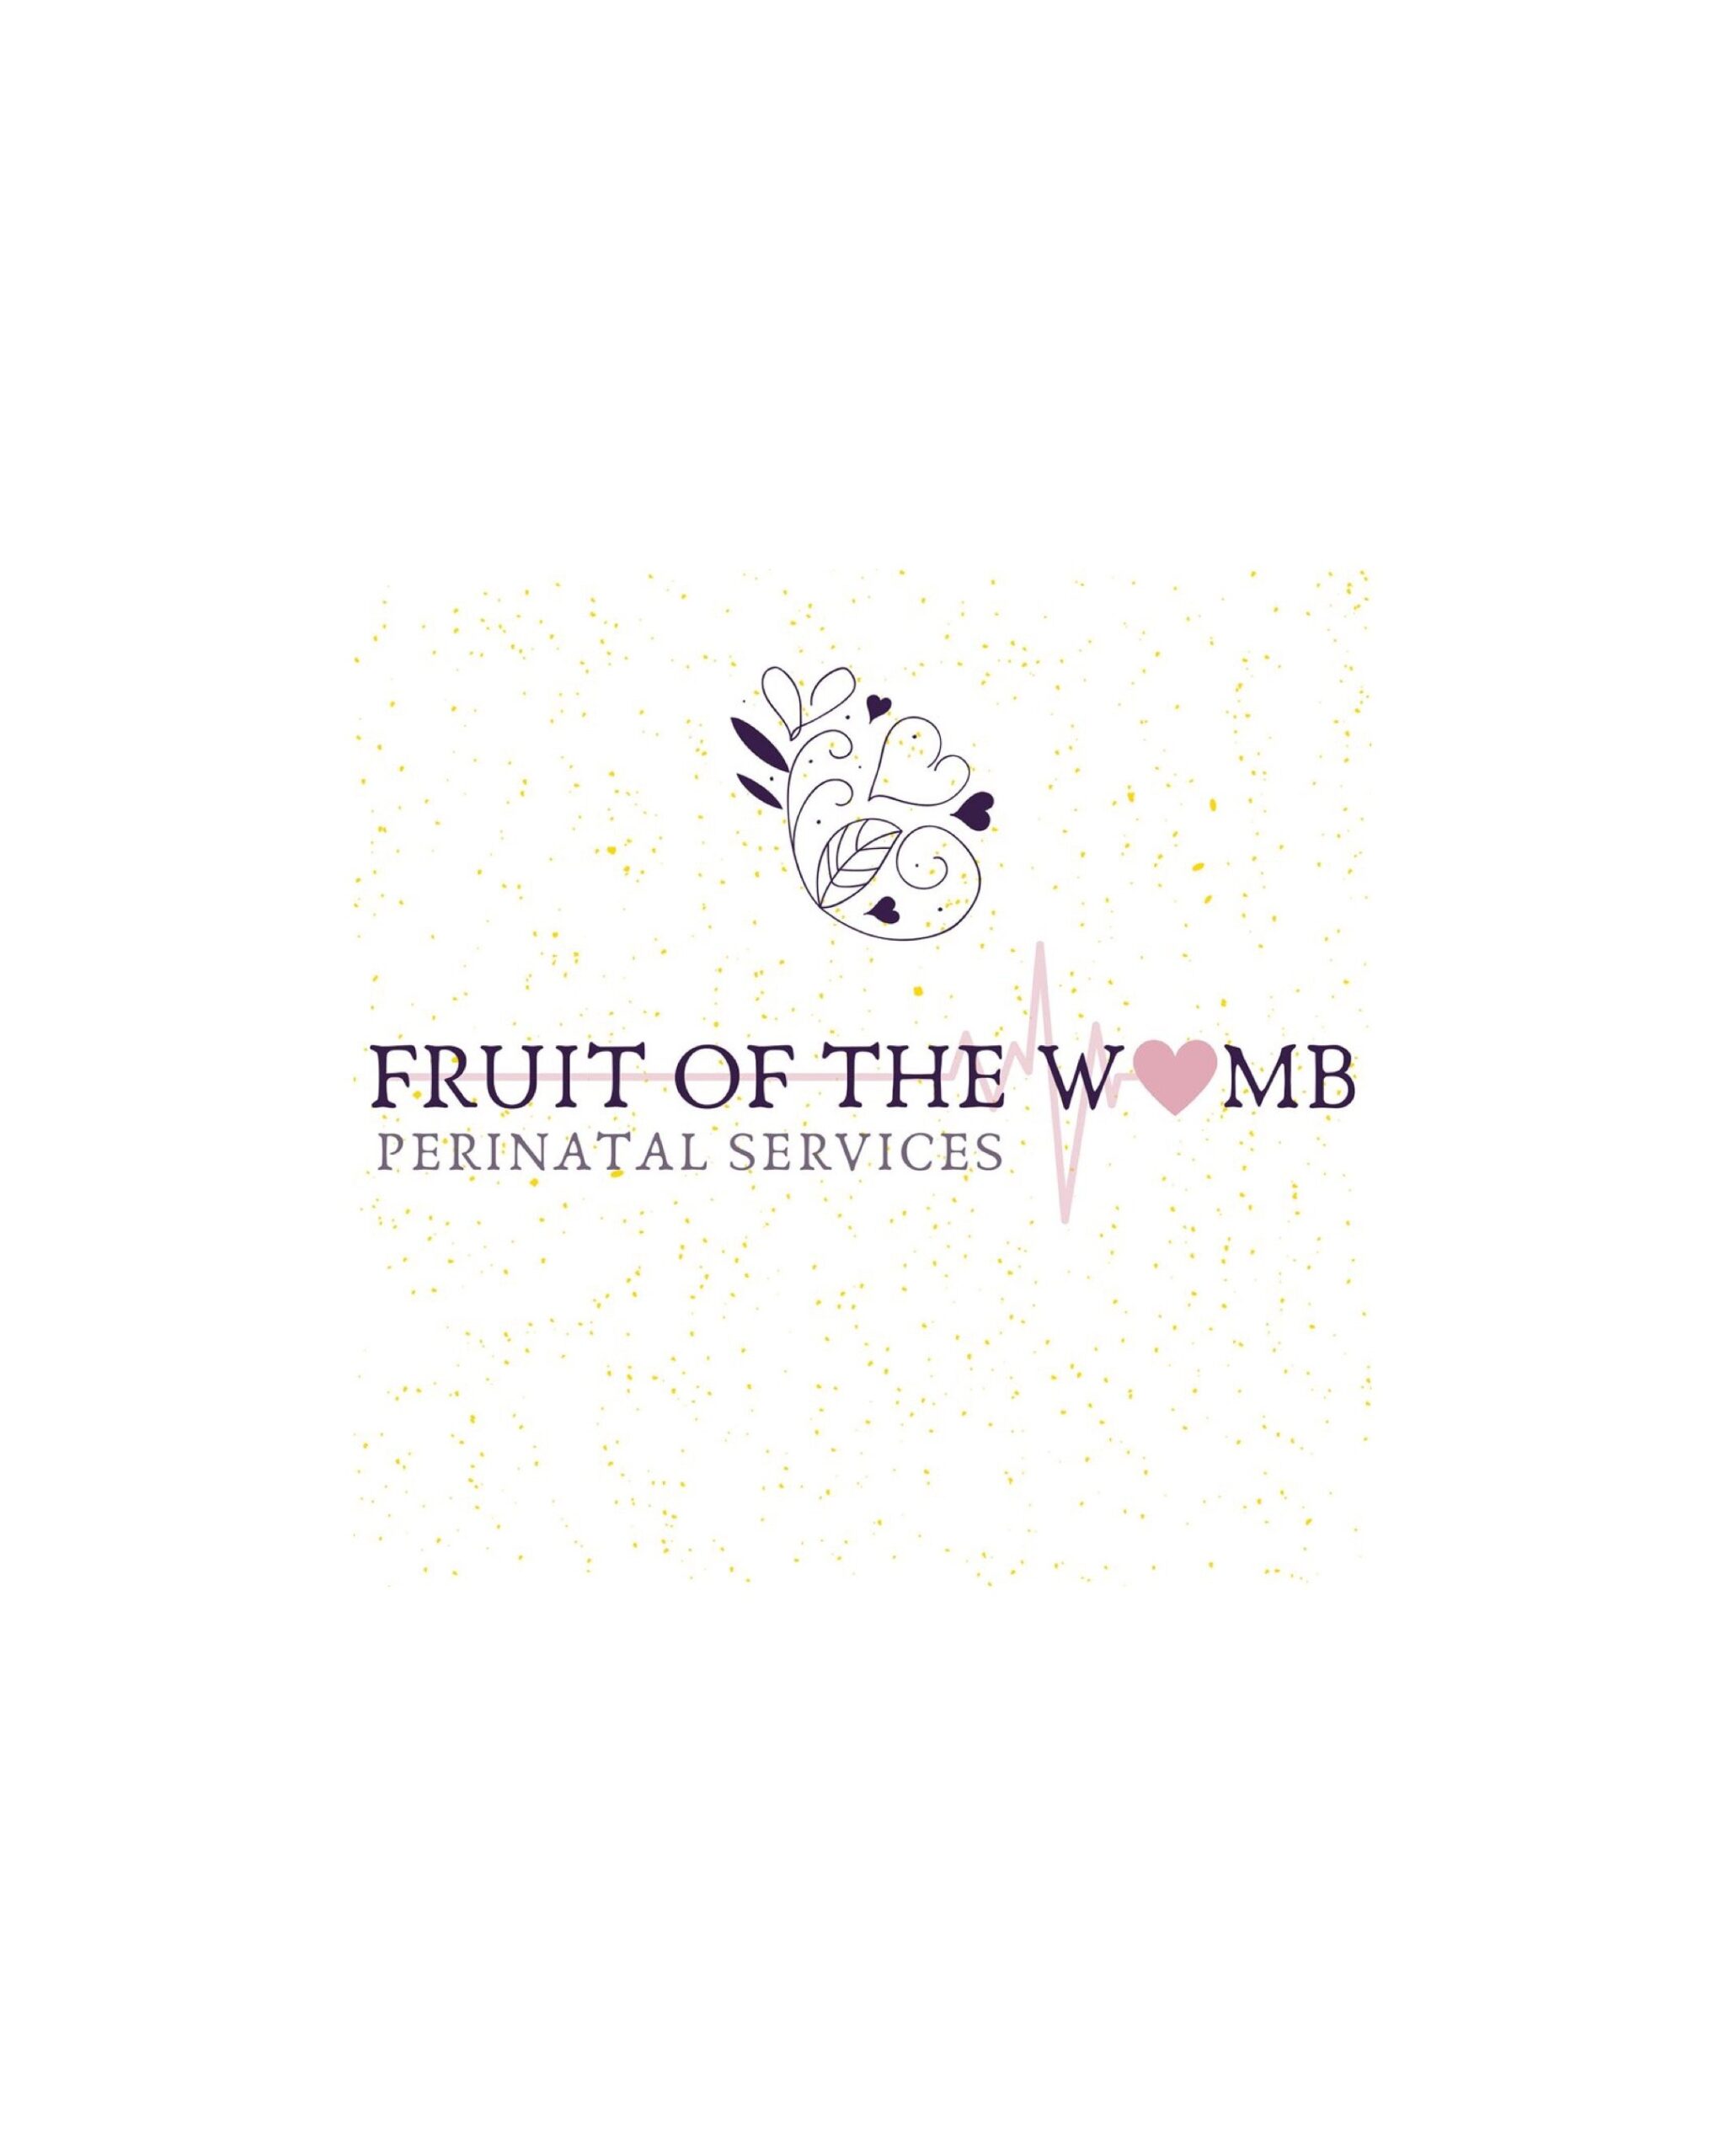 Fruit of The Womb Birth and doula logo